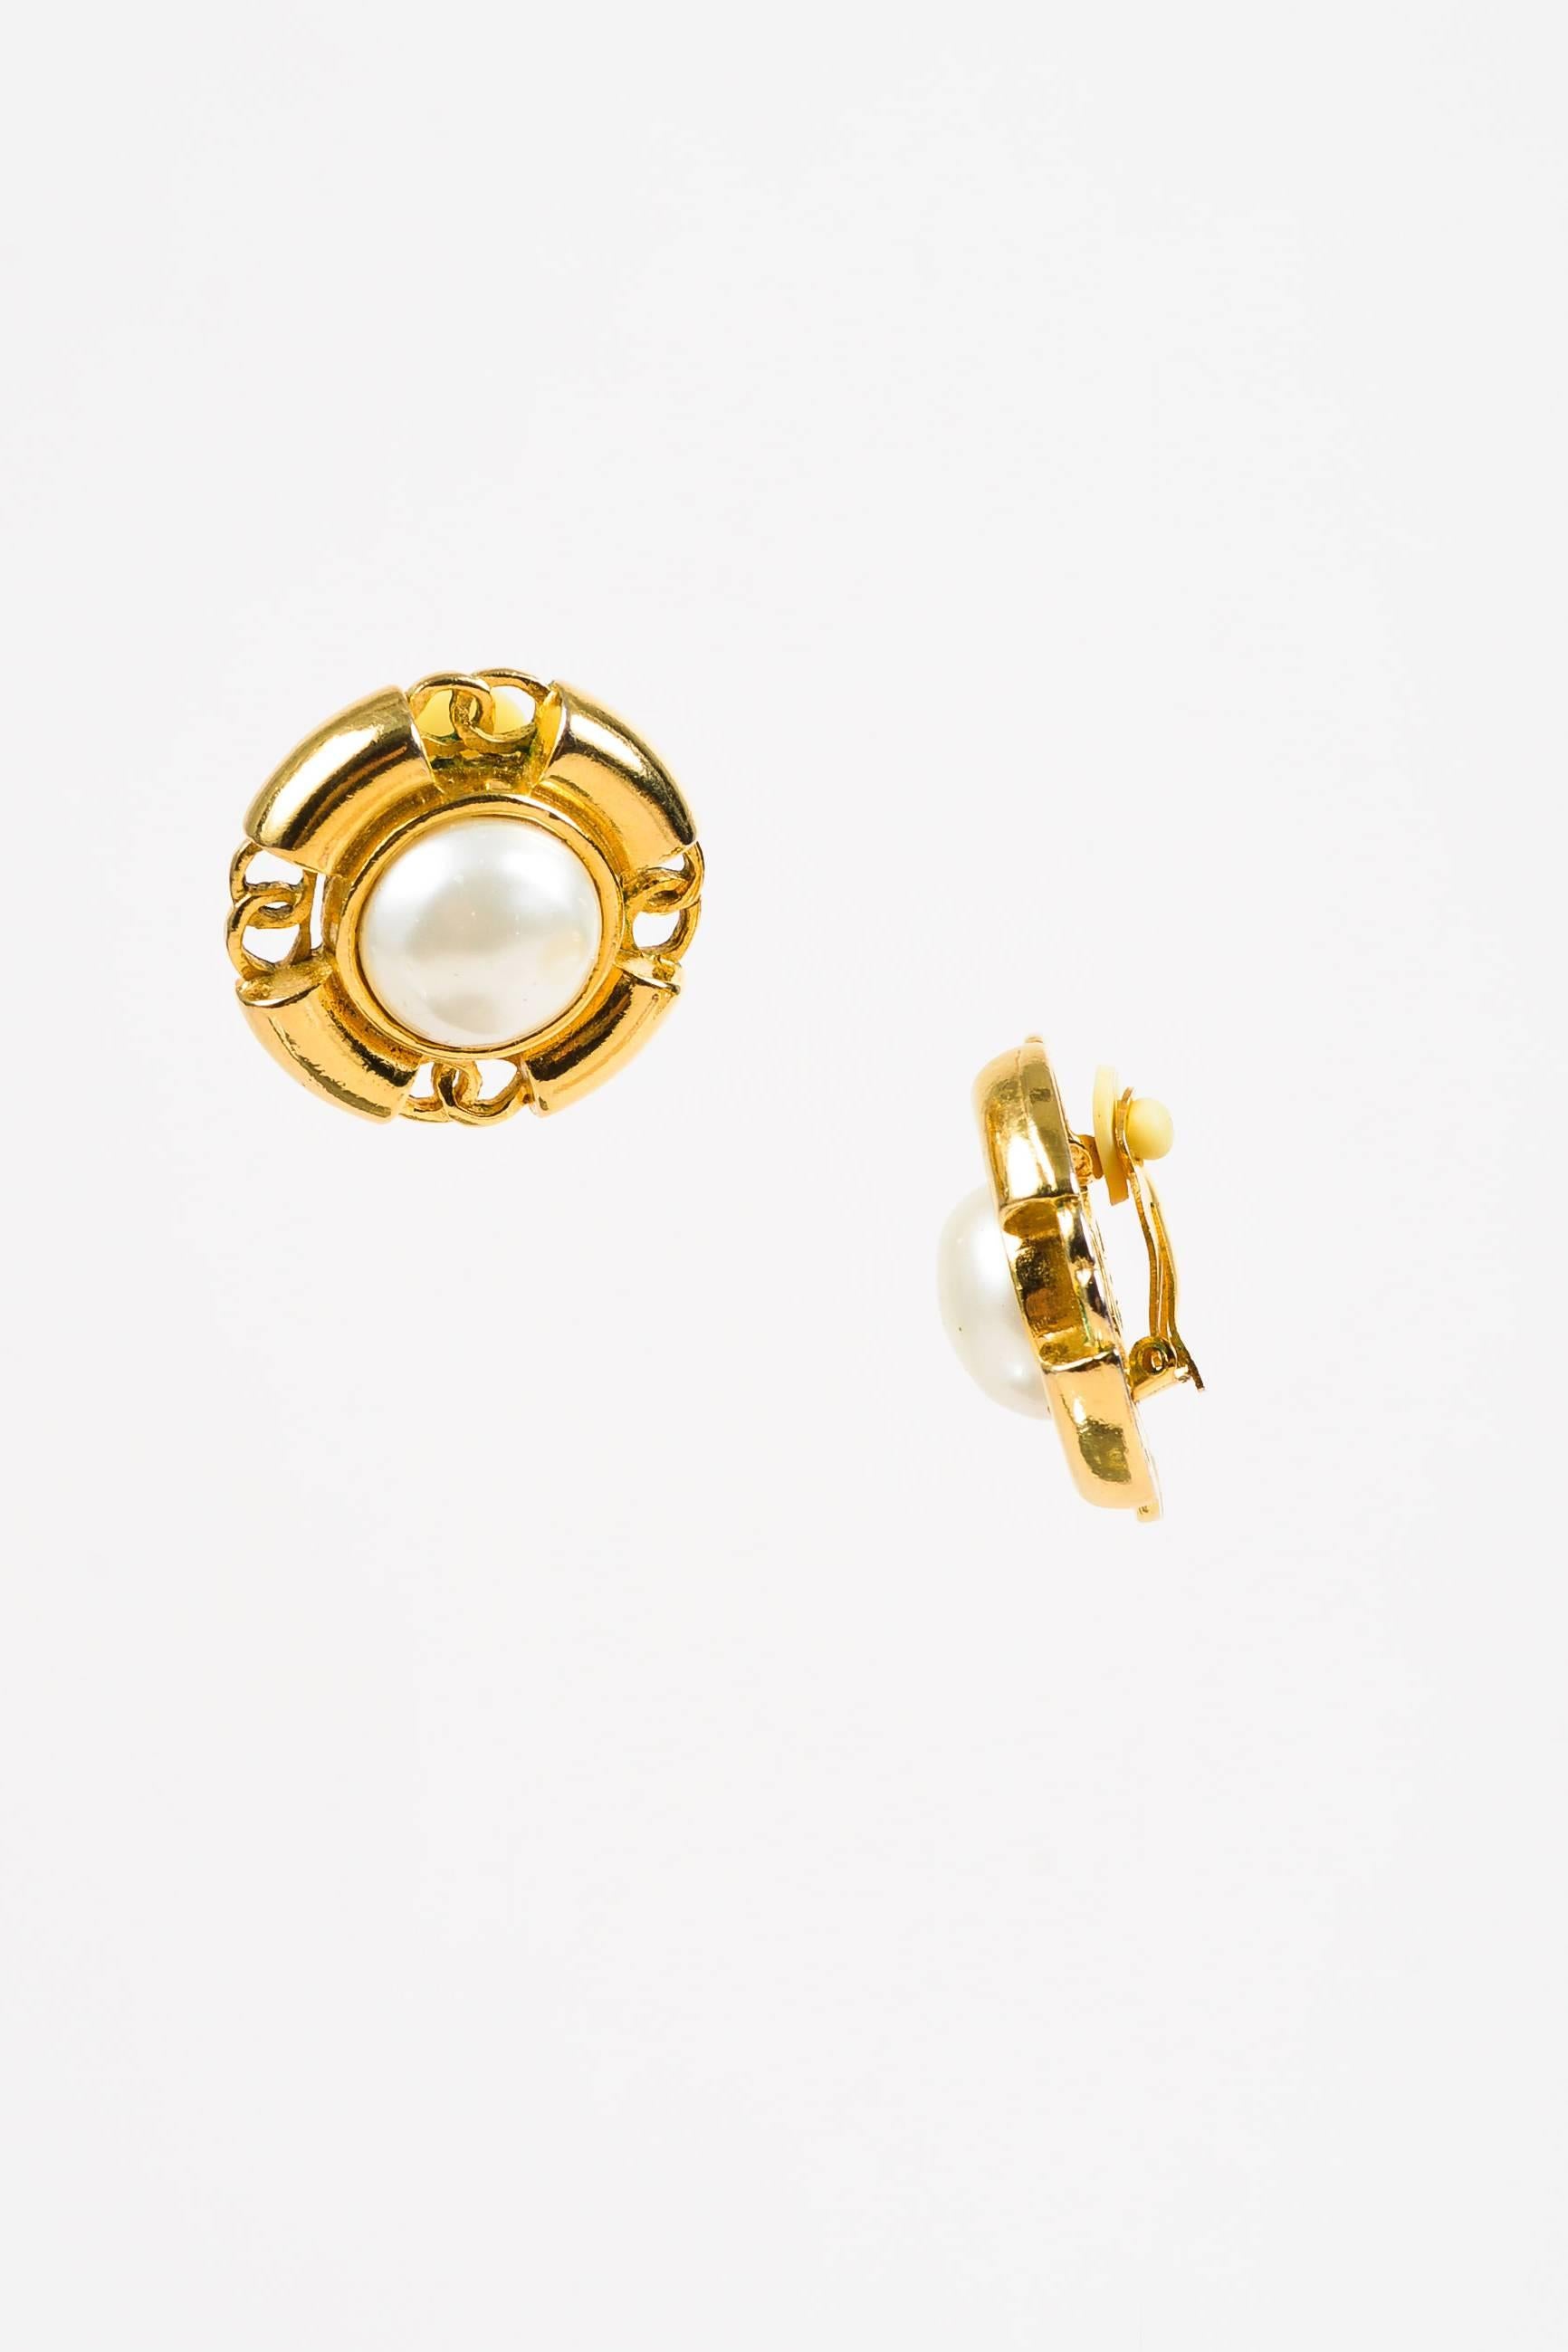 Vintage Chanel Gold Tone Cream Faux Pearl Cut Out 'CC' Clip On Earrings In Good Condition For Sale In Chicago, IL